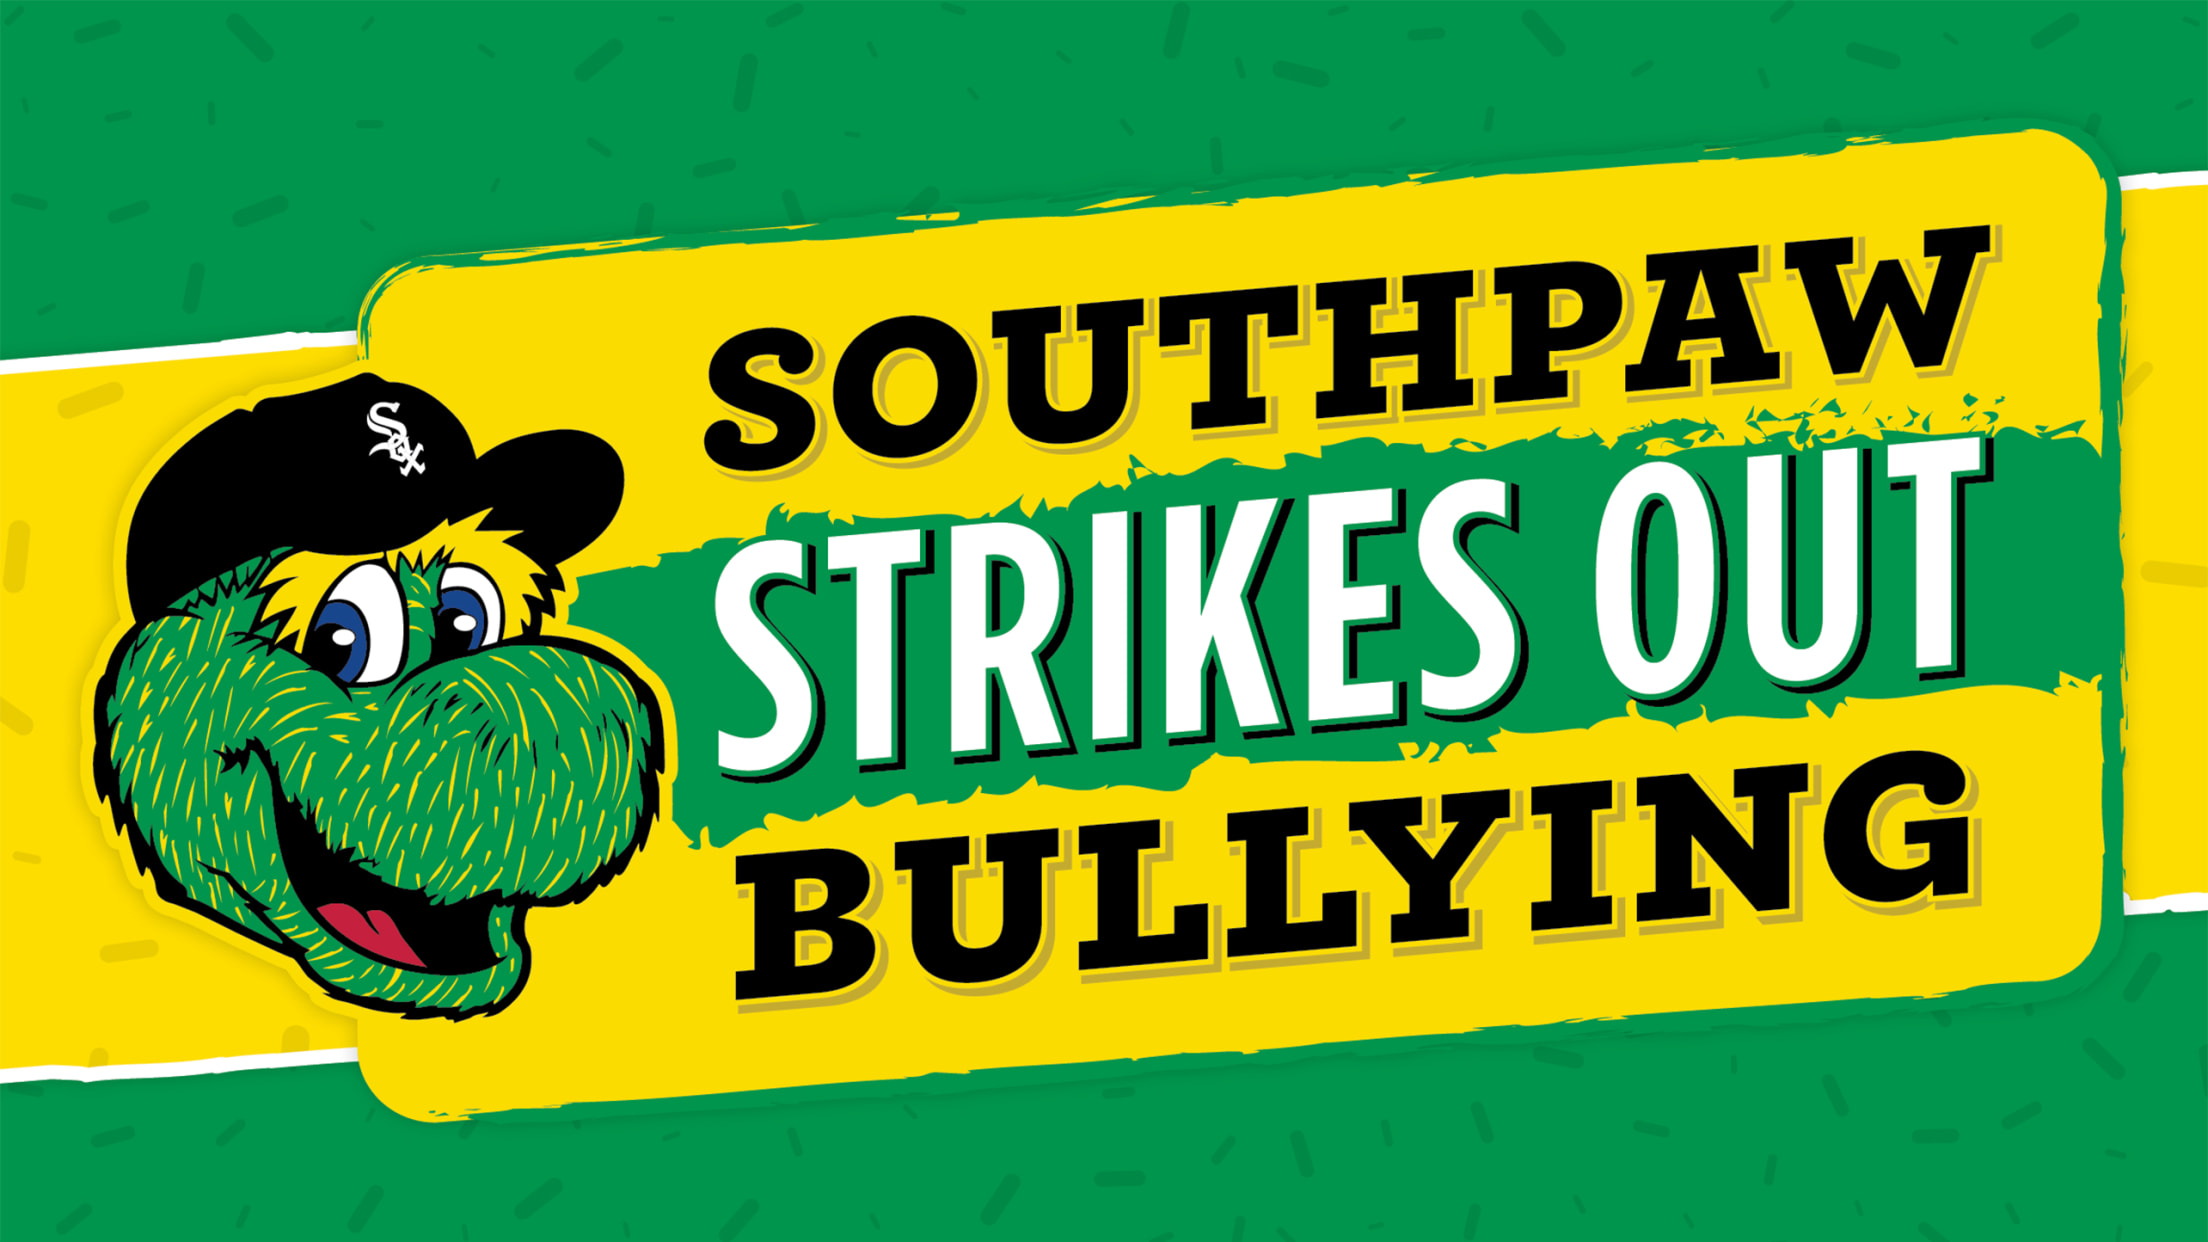 Southpaw: America's true, gritty, working-class mascot – South Side Hit Pen